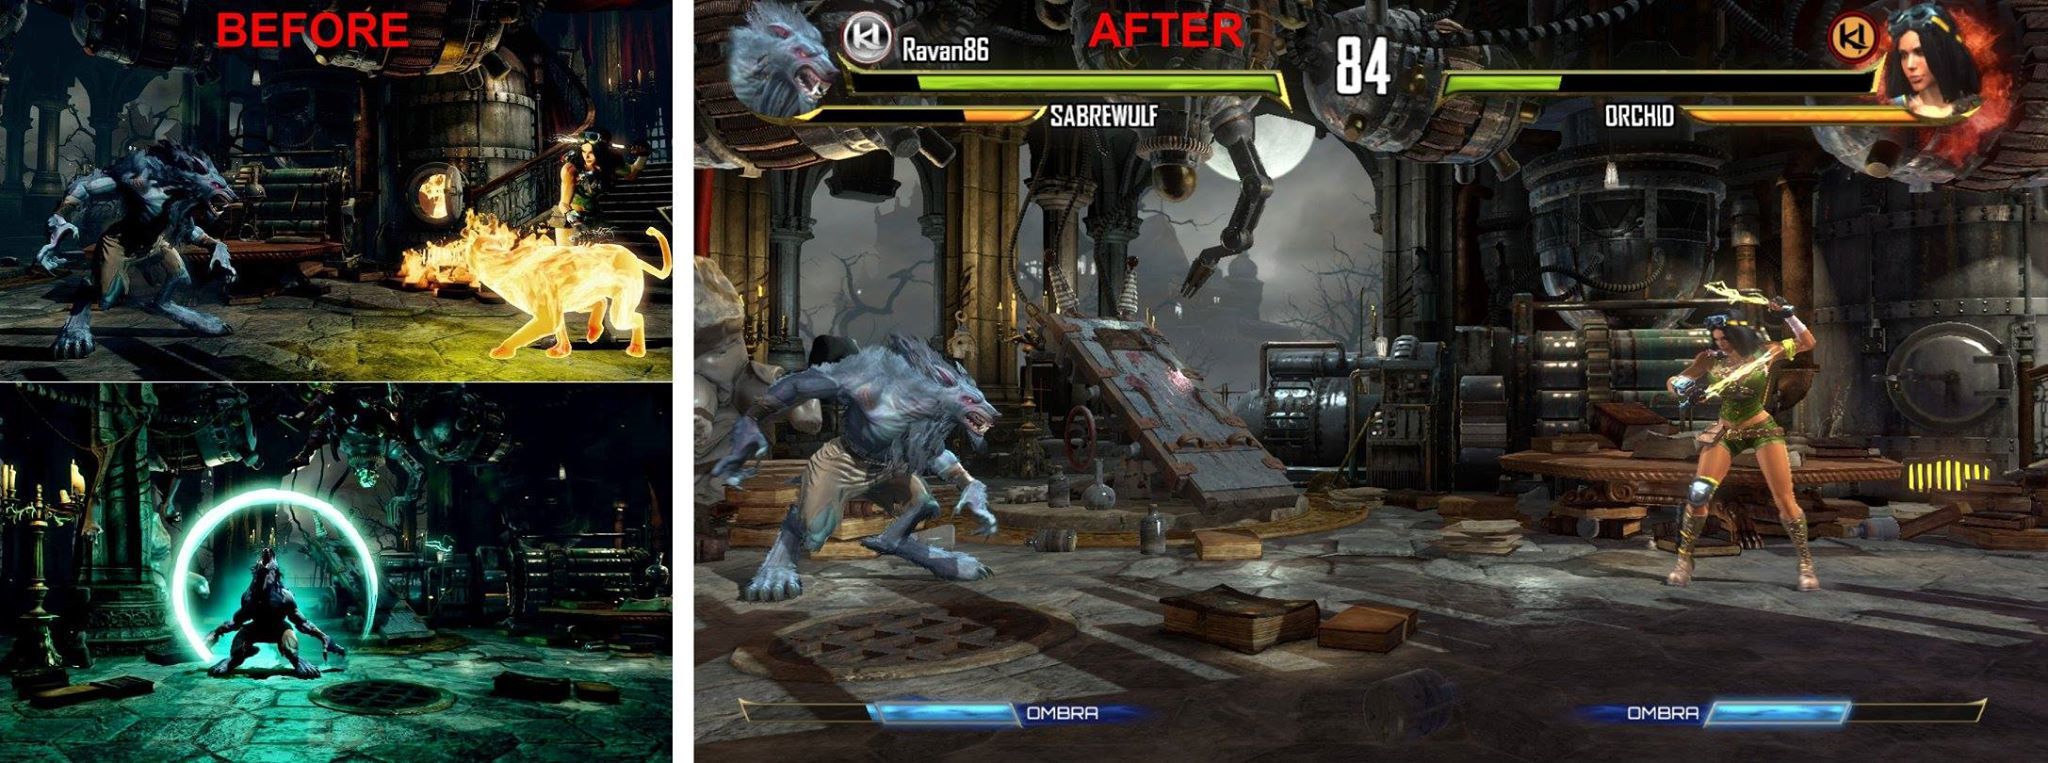 Sabrewulf Stage Old Vs New Game Suggestions Killer